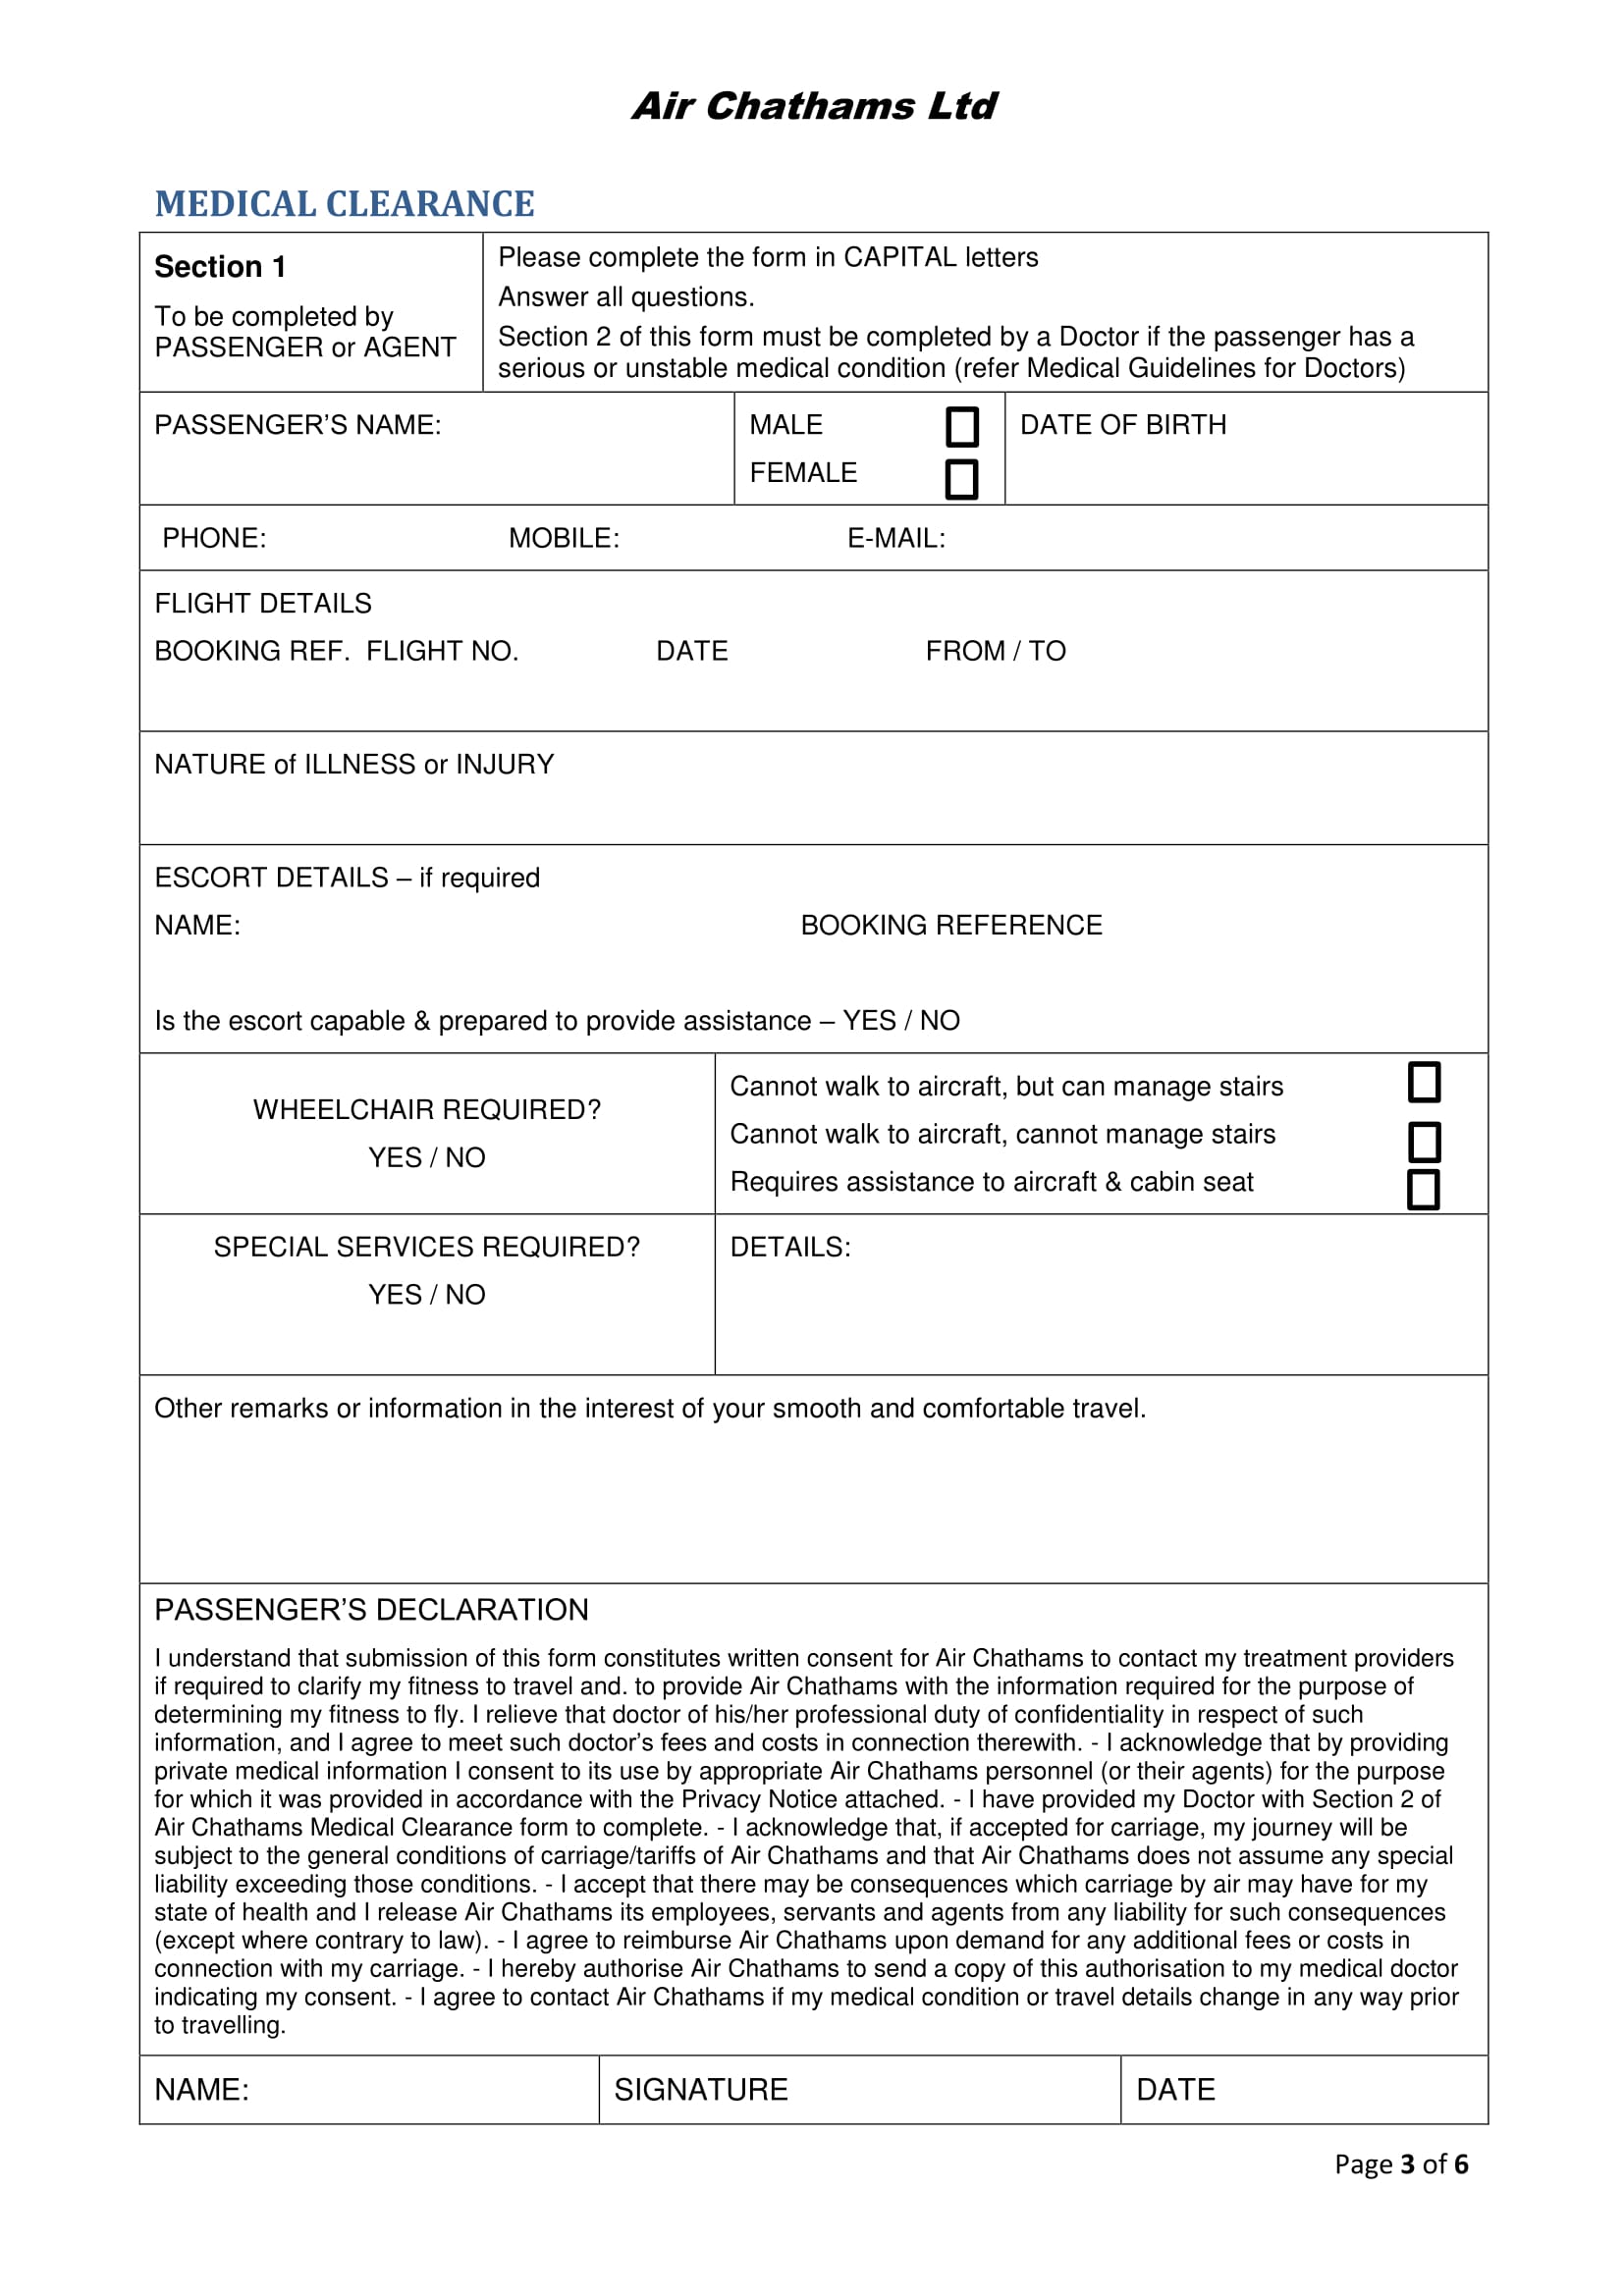 airline agent medical clearance form 1